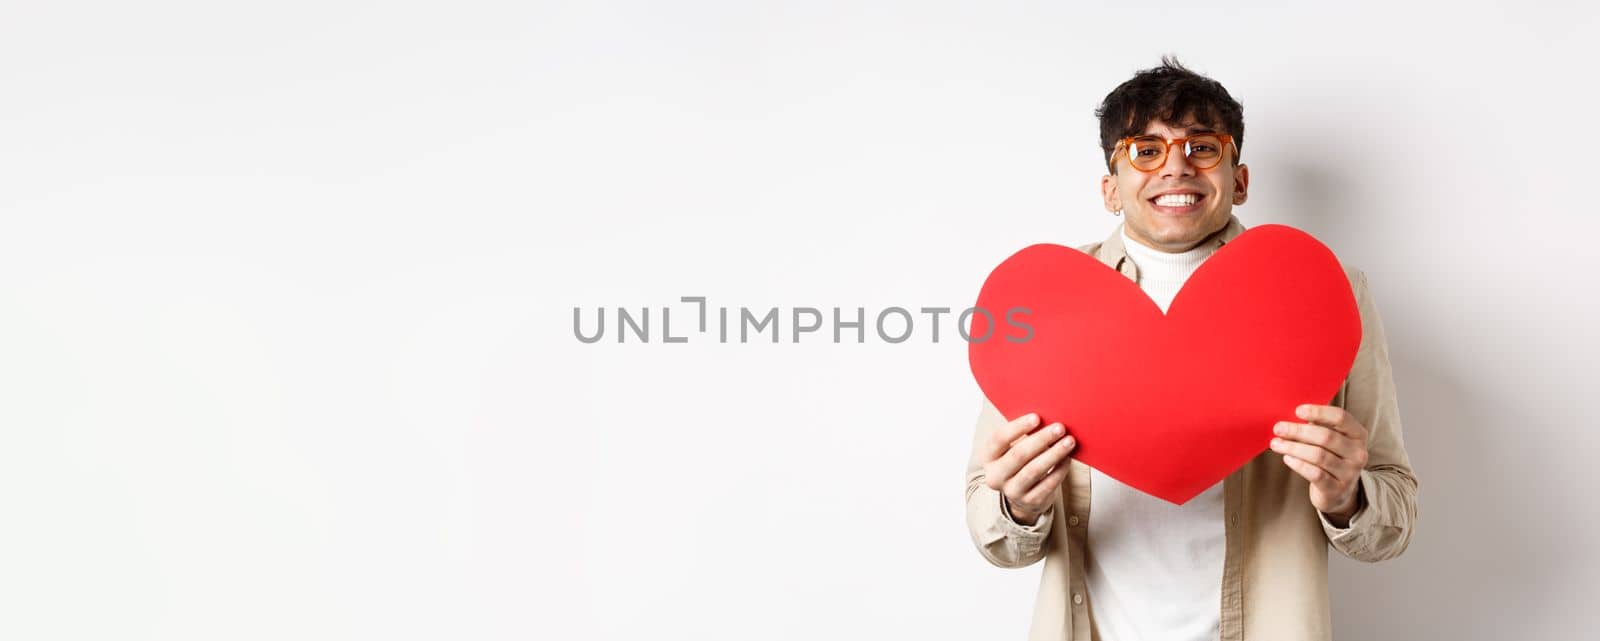 Cheerful young man smiling and looking thrilled at camera, showing big red heart cutout on Valentines day, making romantic gift to lover, white background.